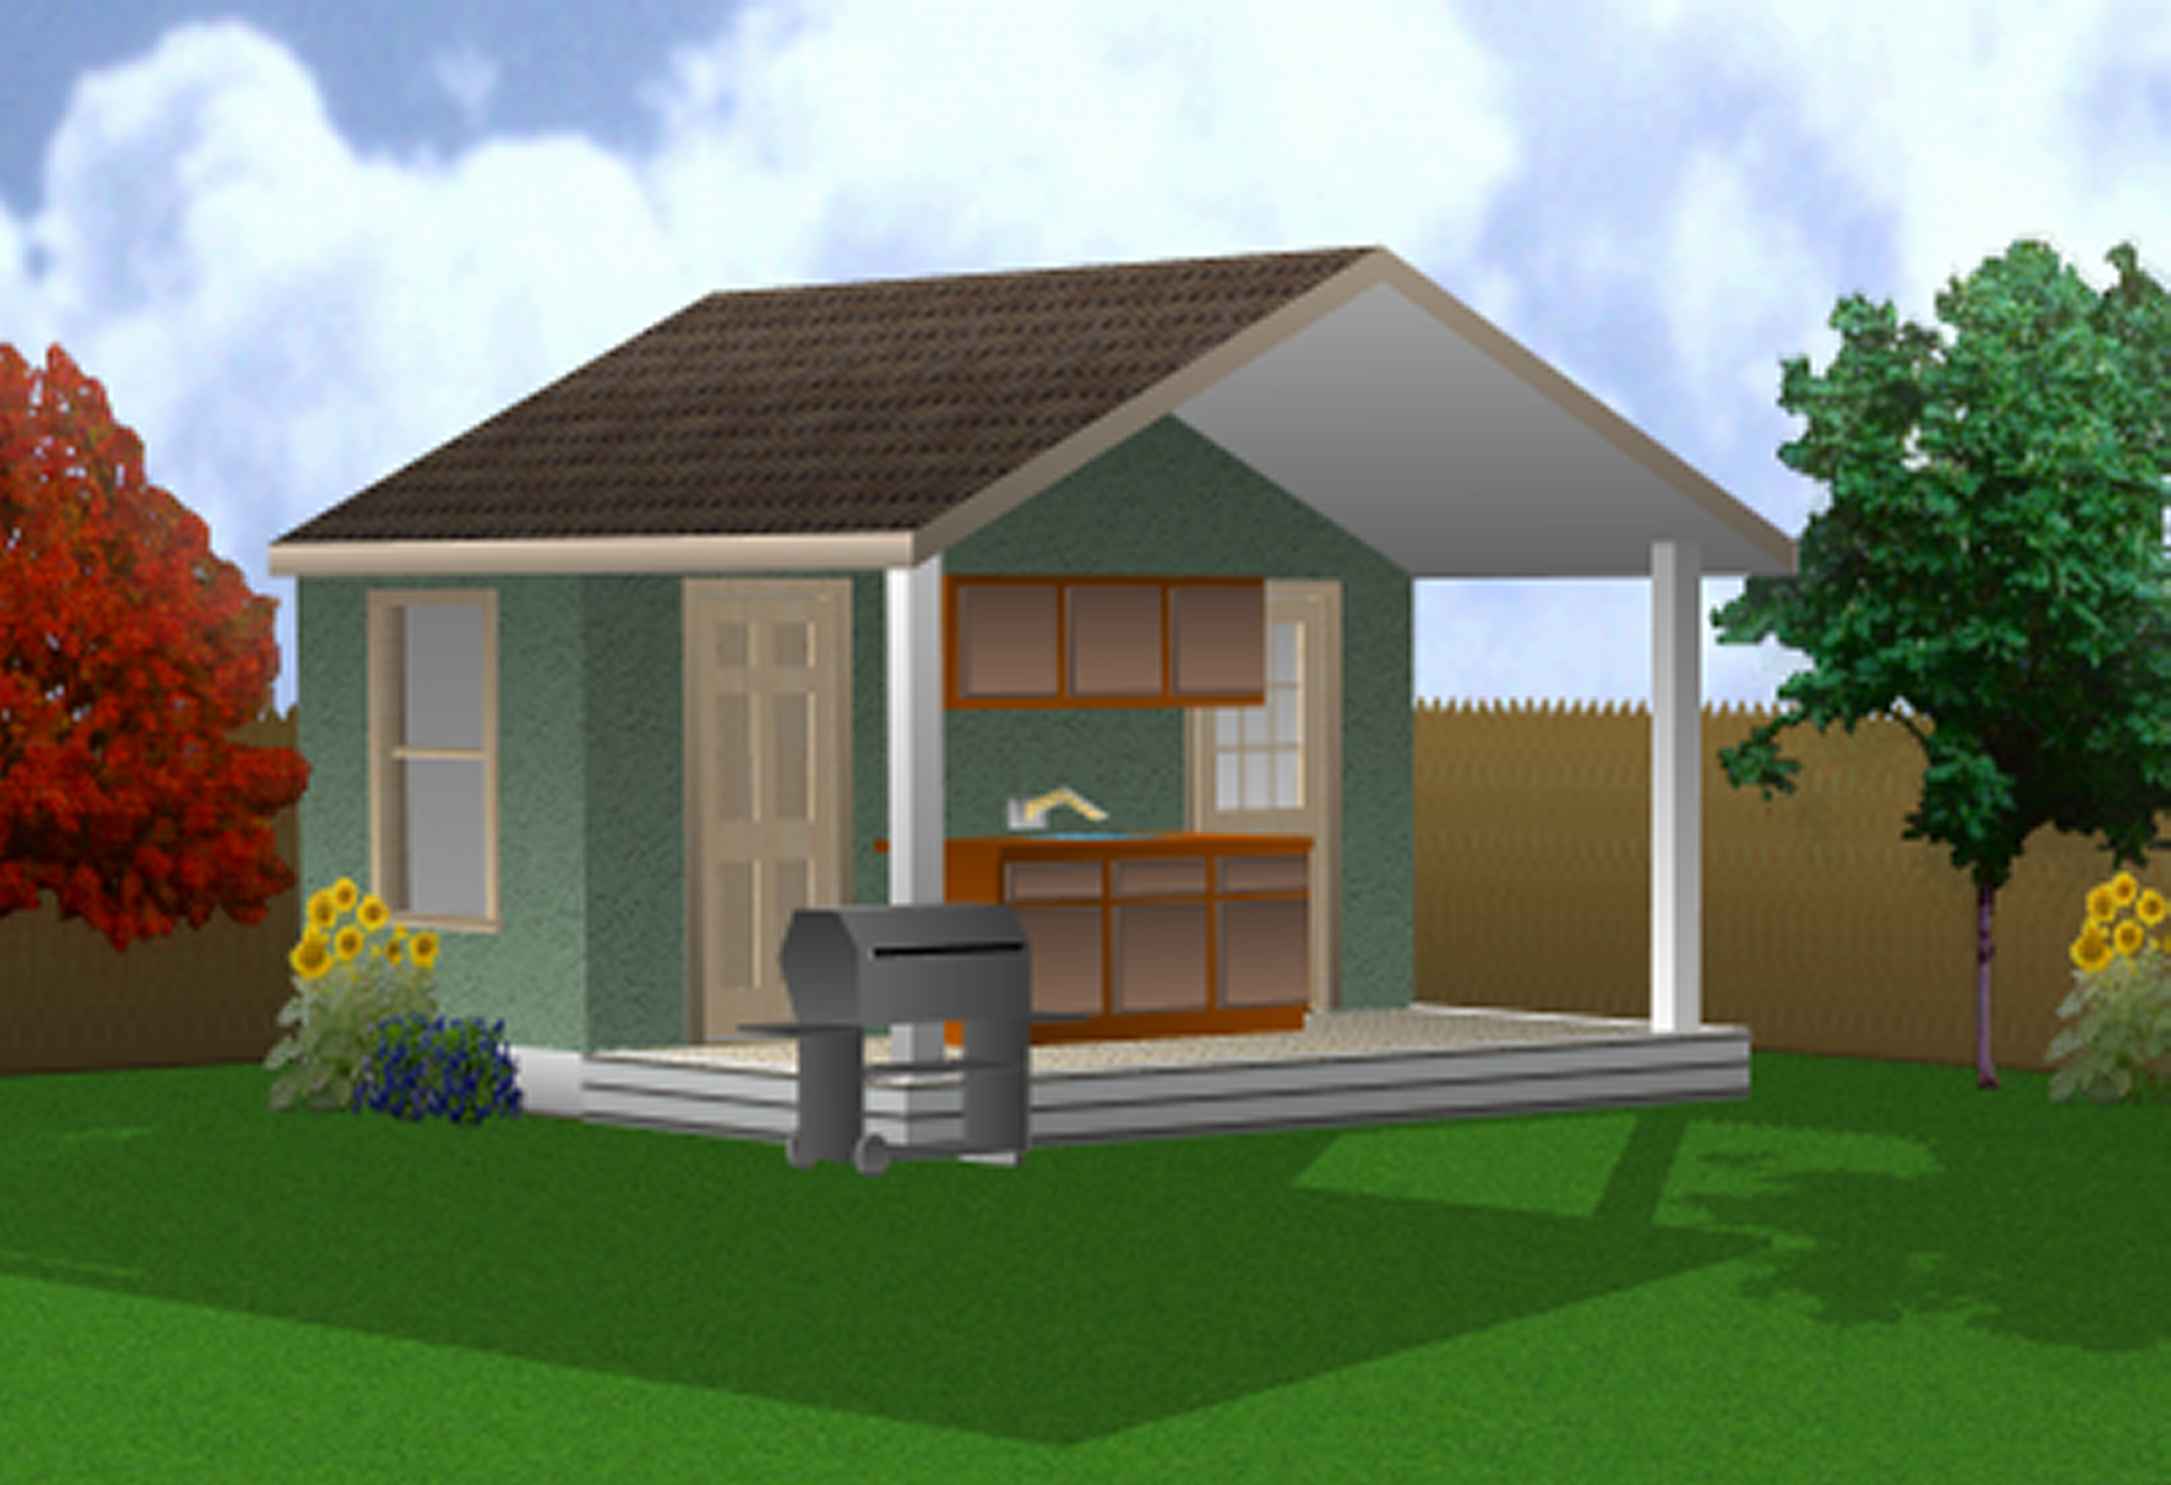 plan from making a sheds: free 12x16 shed plans 8x6= info